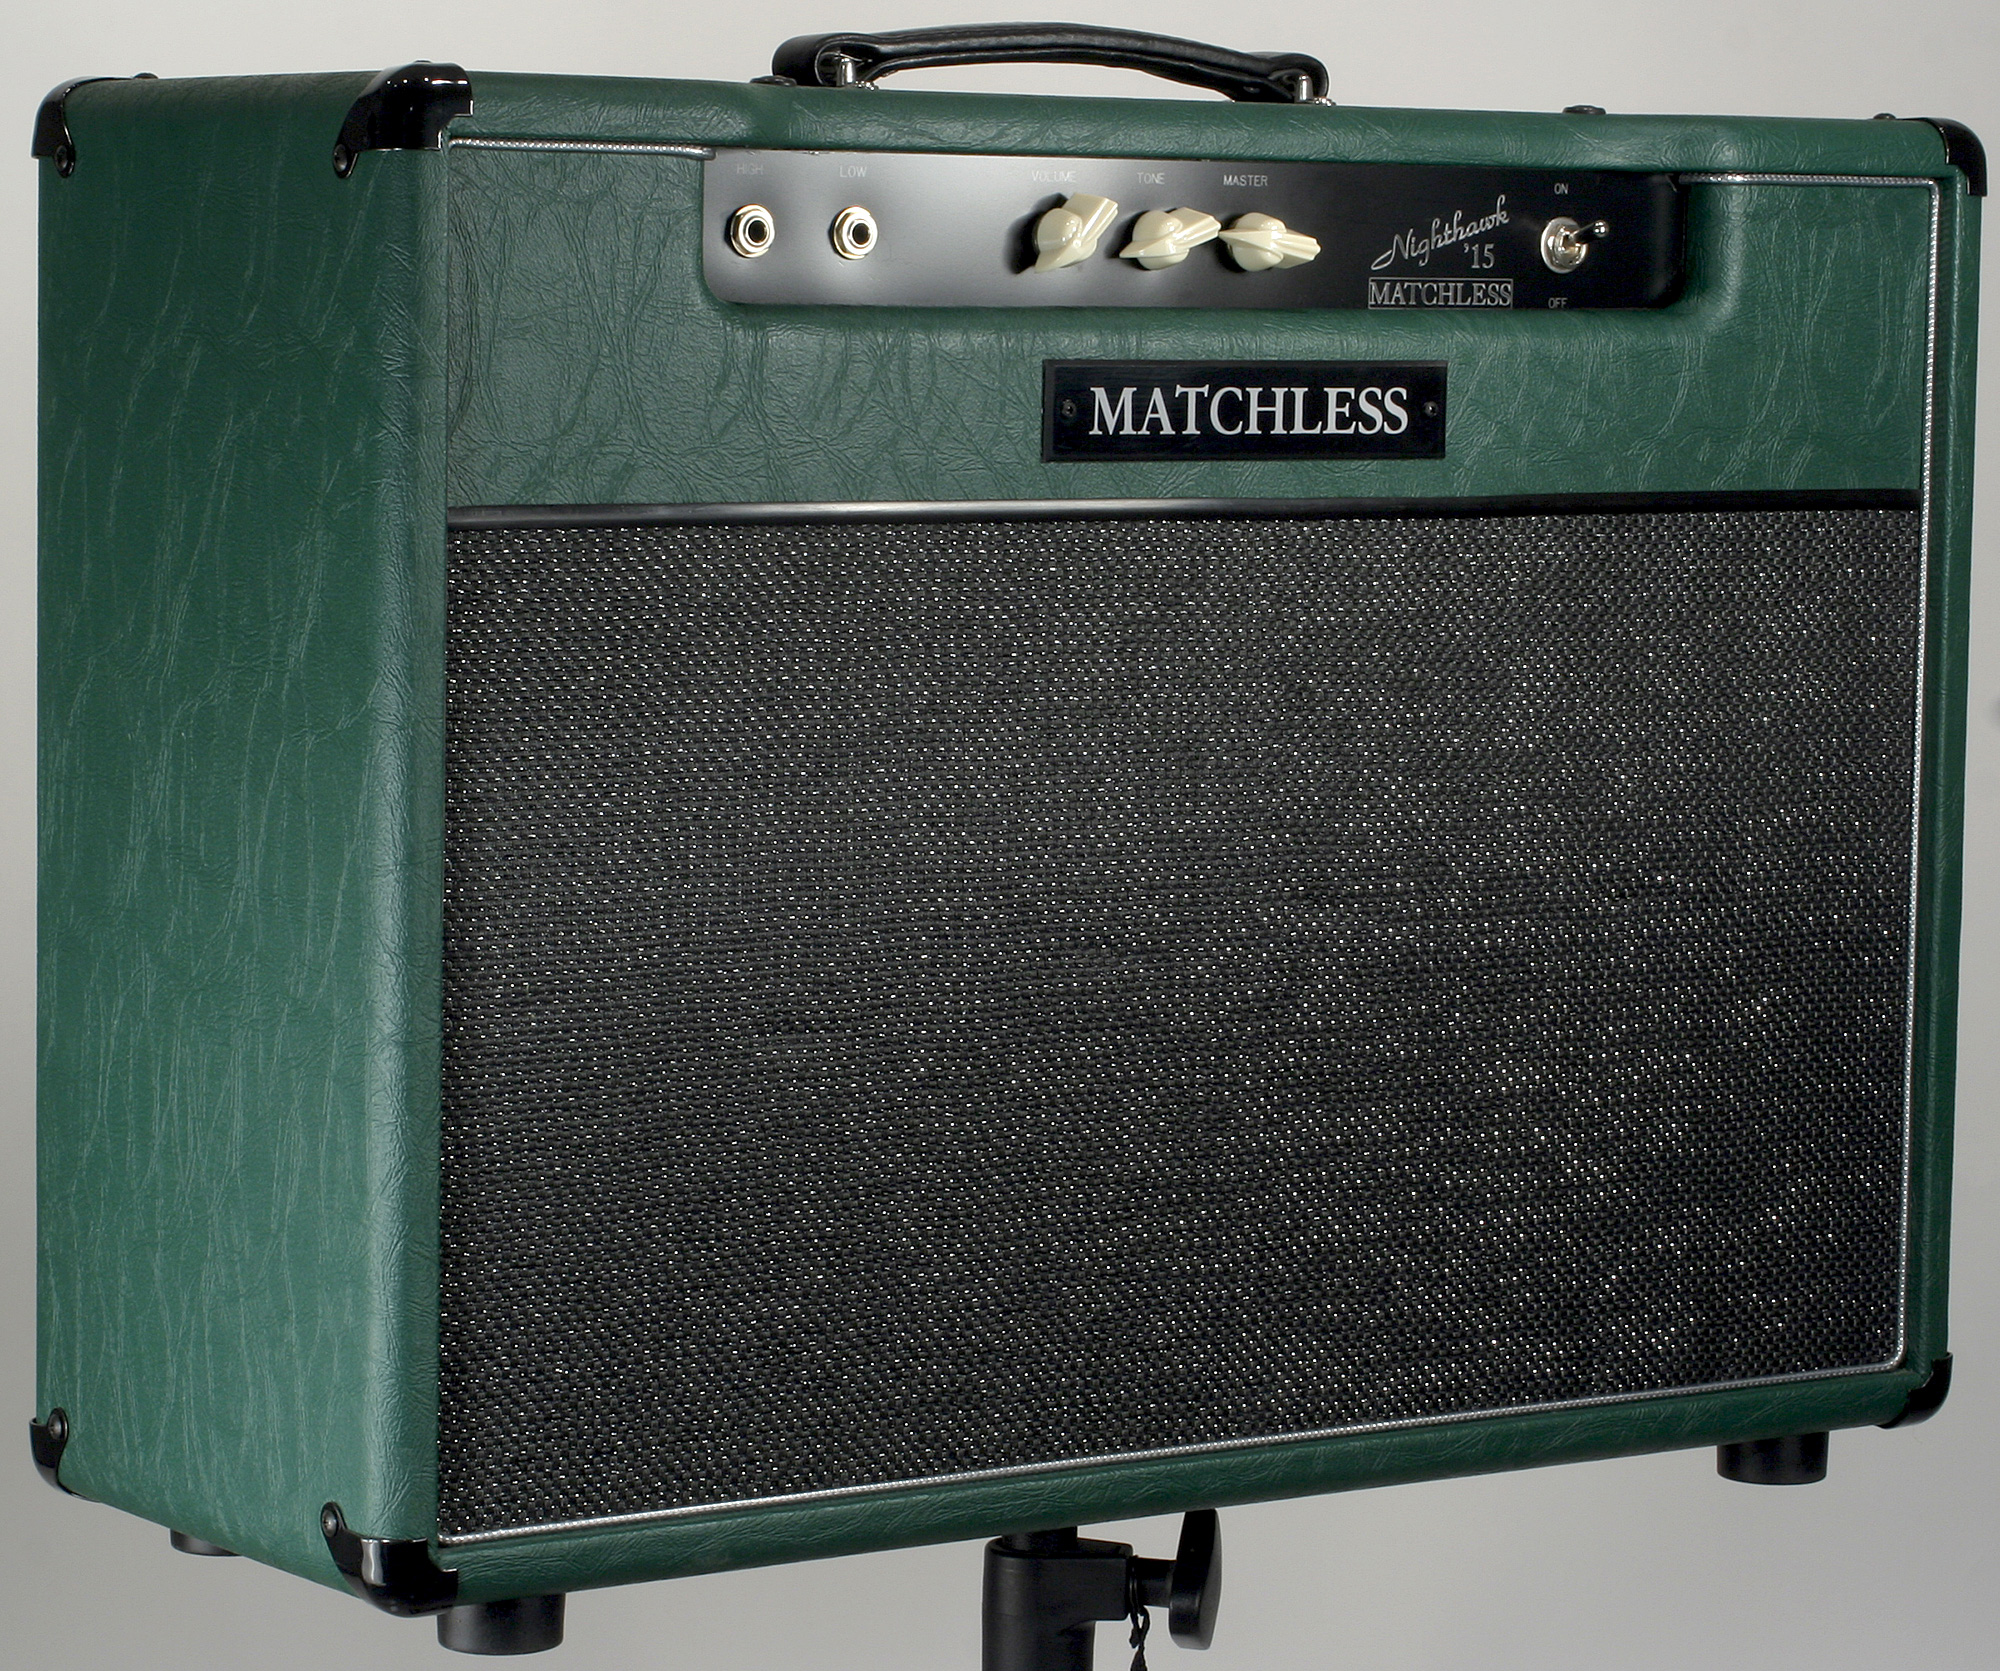 Matchless Nighthawk 112 15w 1x12 Green Silver - Ampli Guitare Électrique Combo - Variation 1